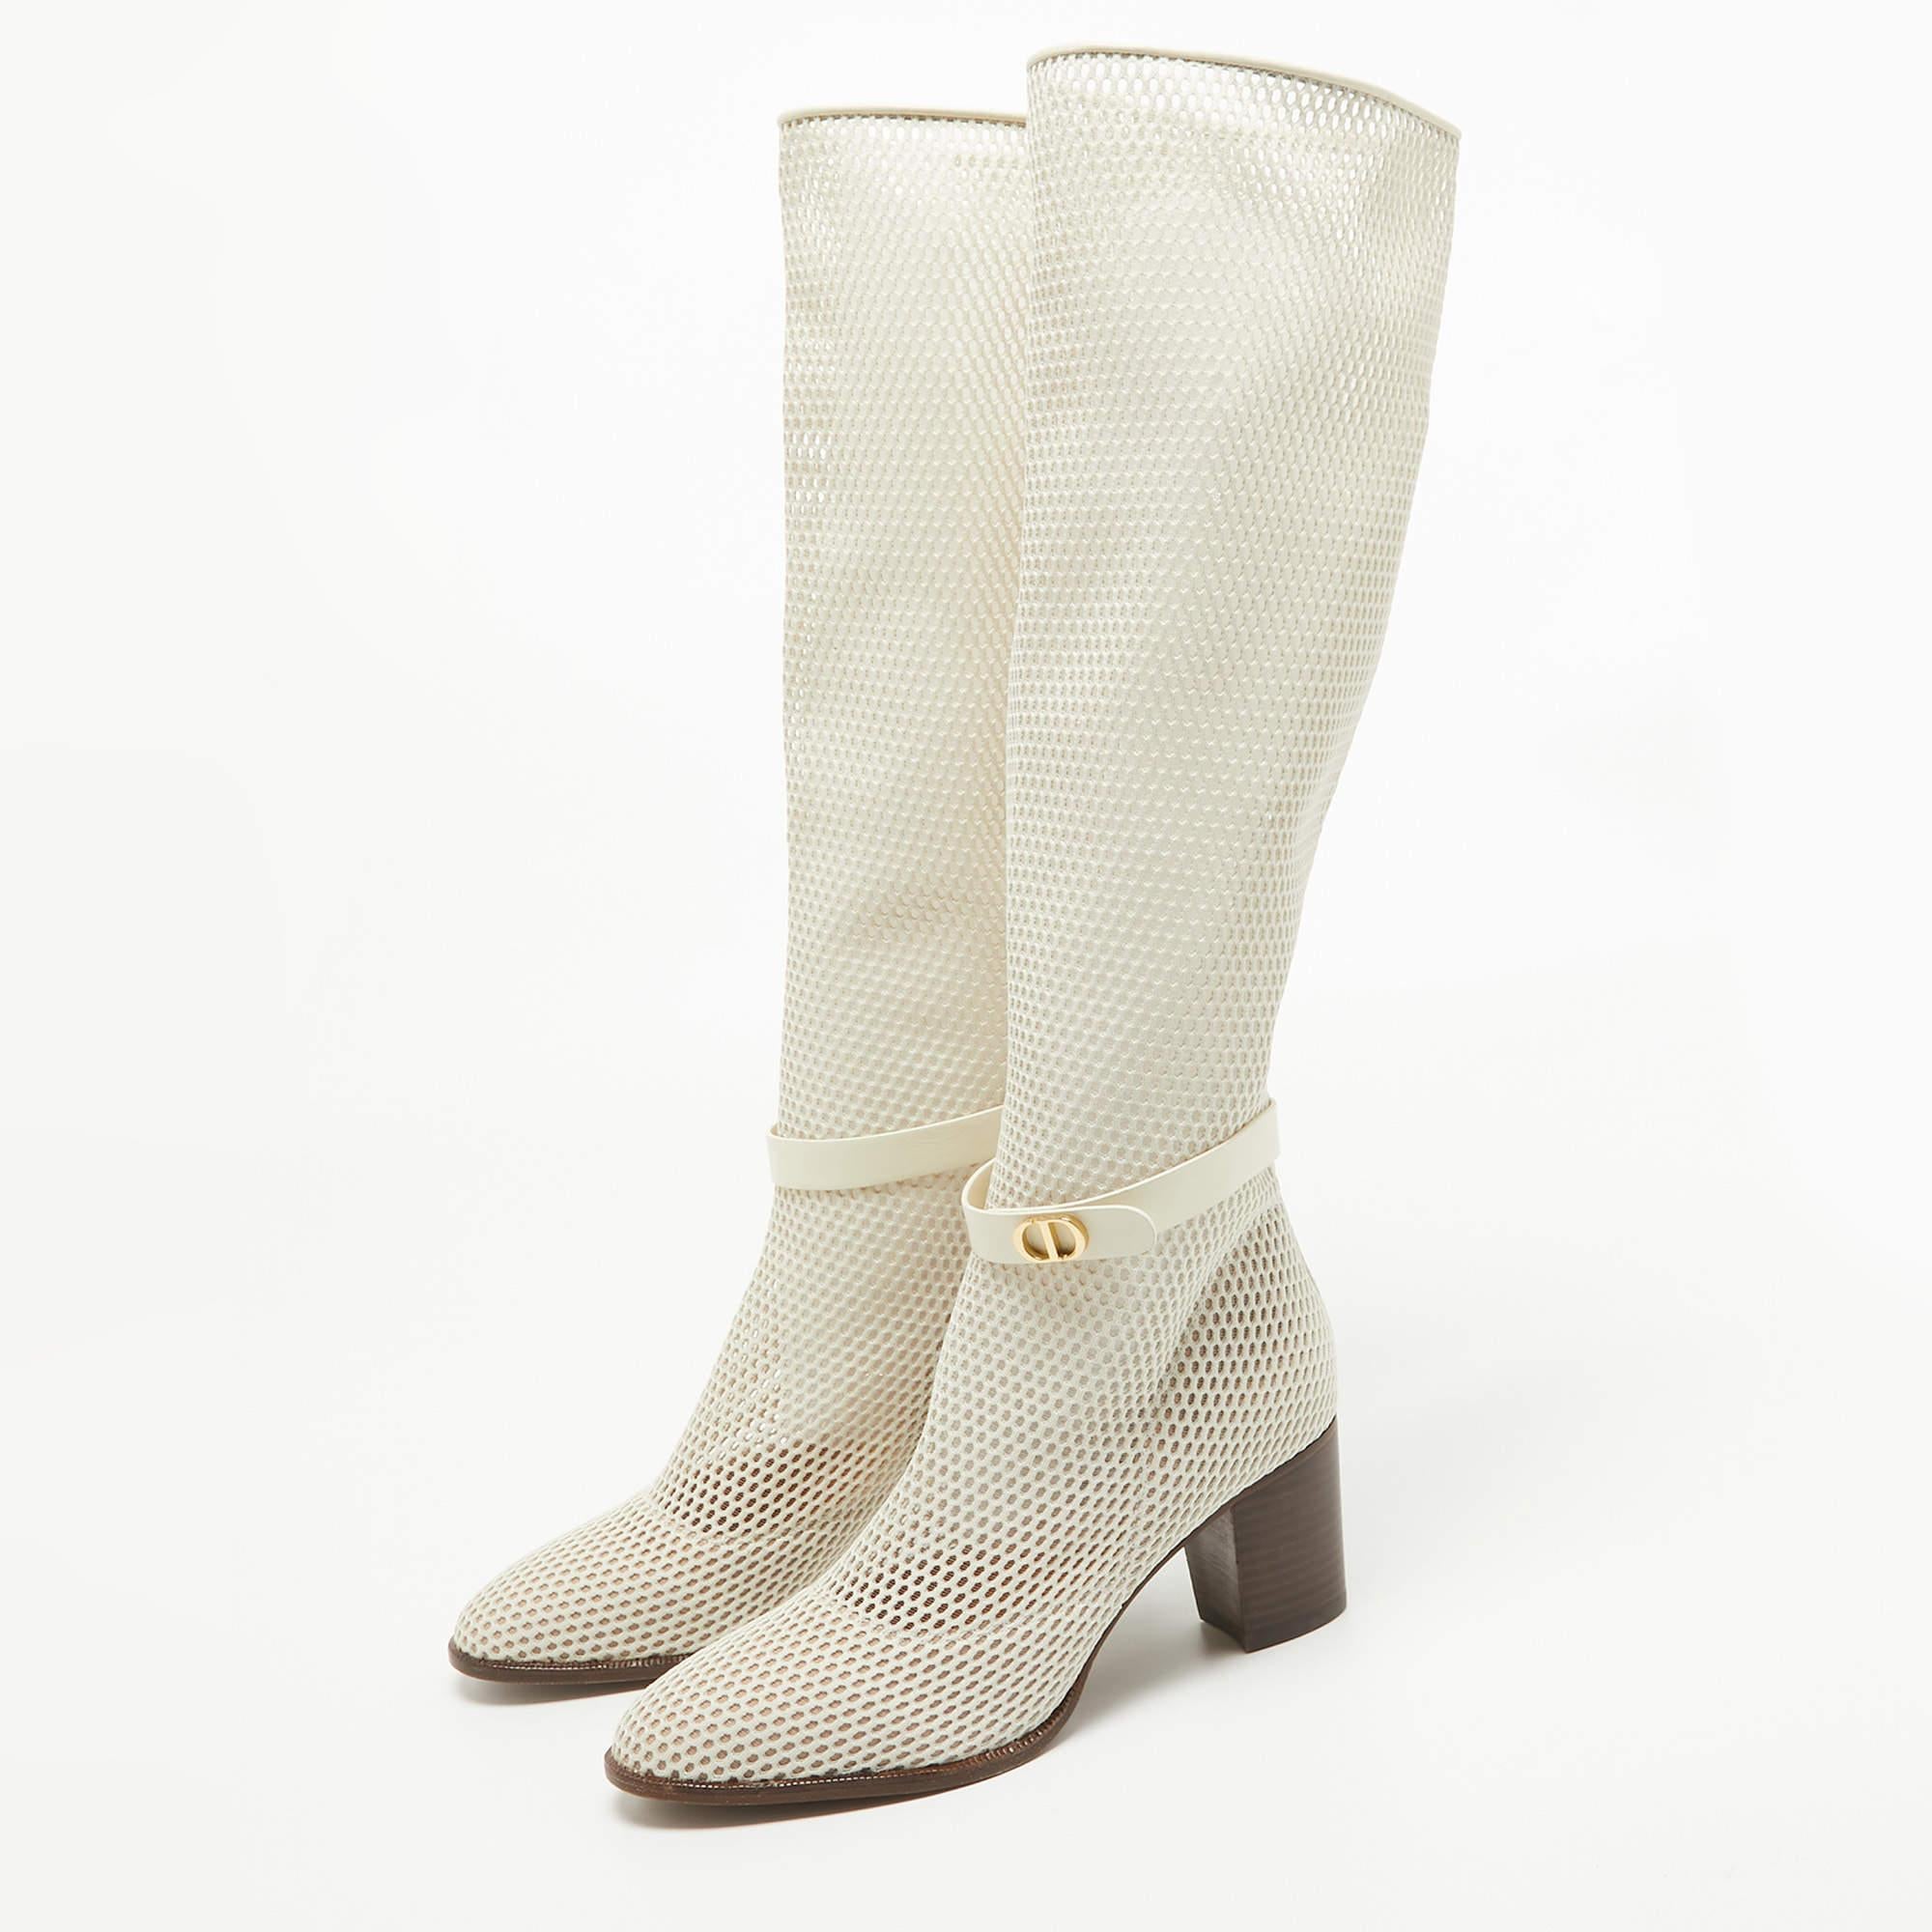 Enjoy the most fashionable days with these stylish Dior boots. Modern in design and craftsmanship, they are fashioned to keep you comfortable and chic!

